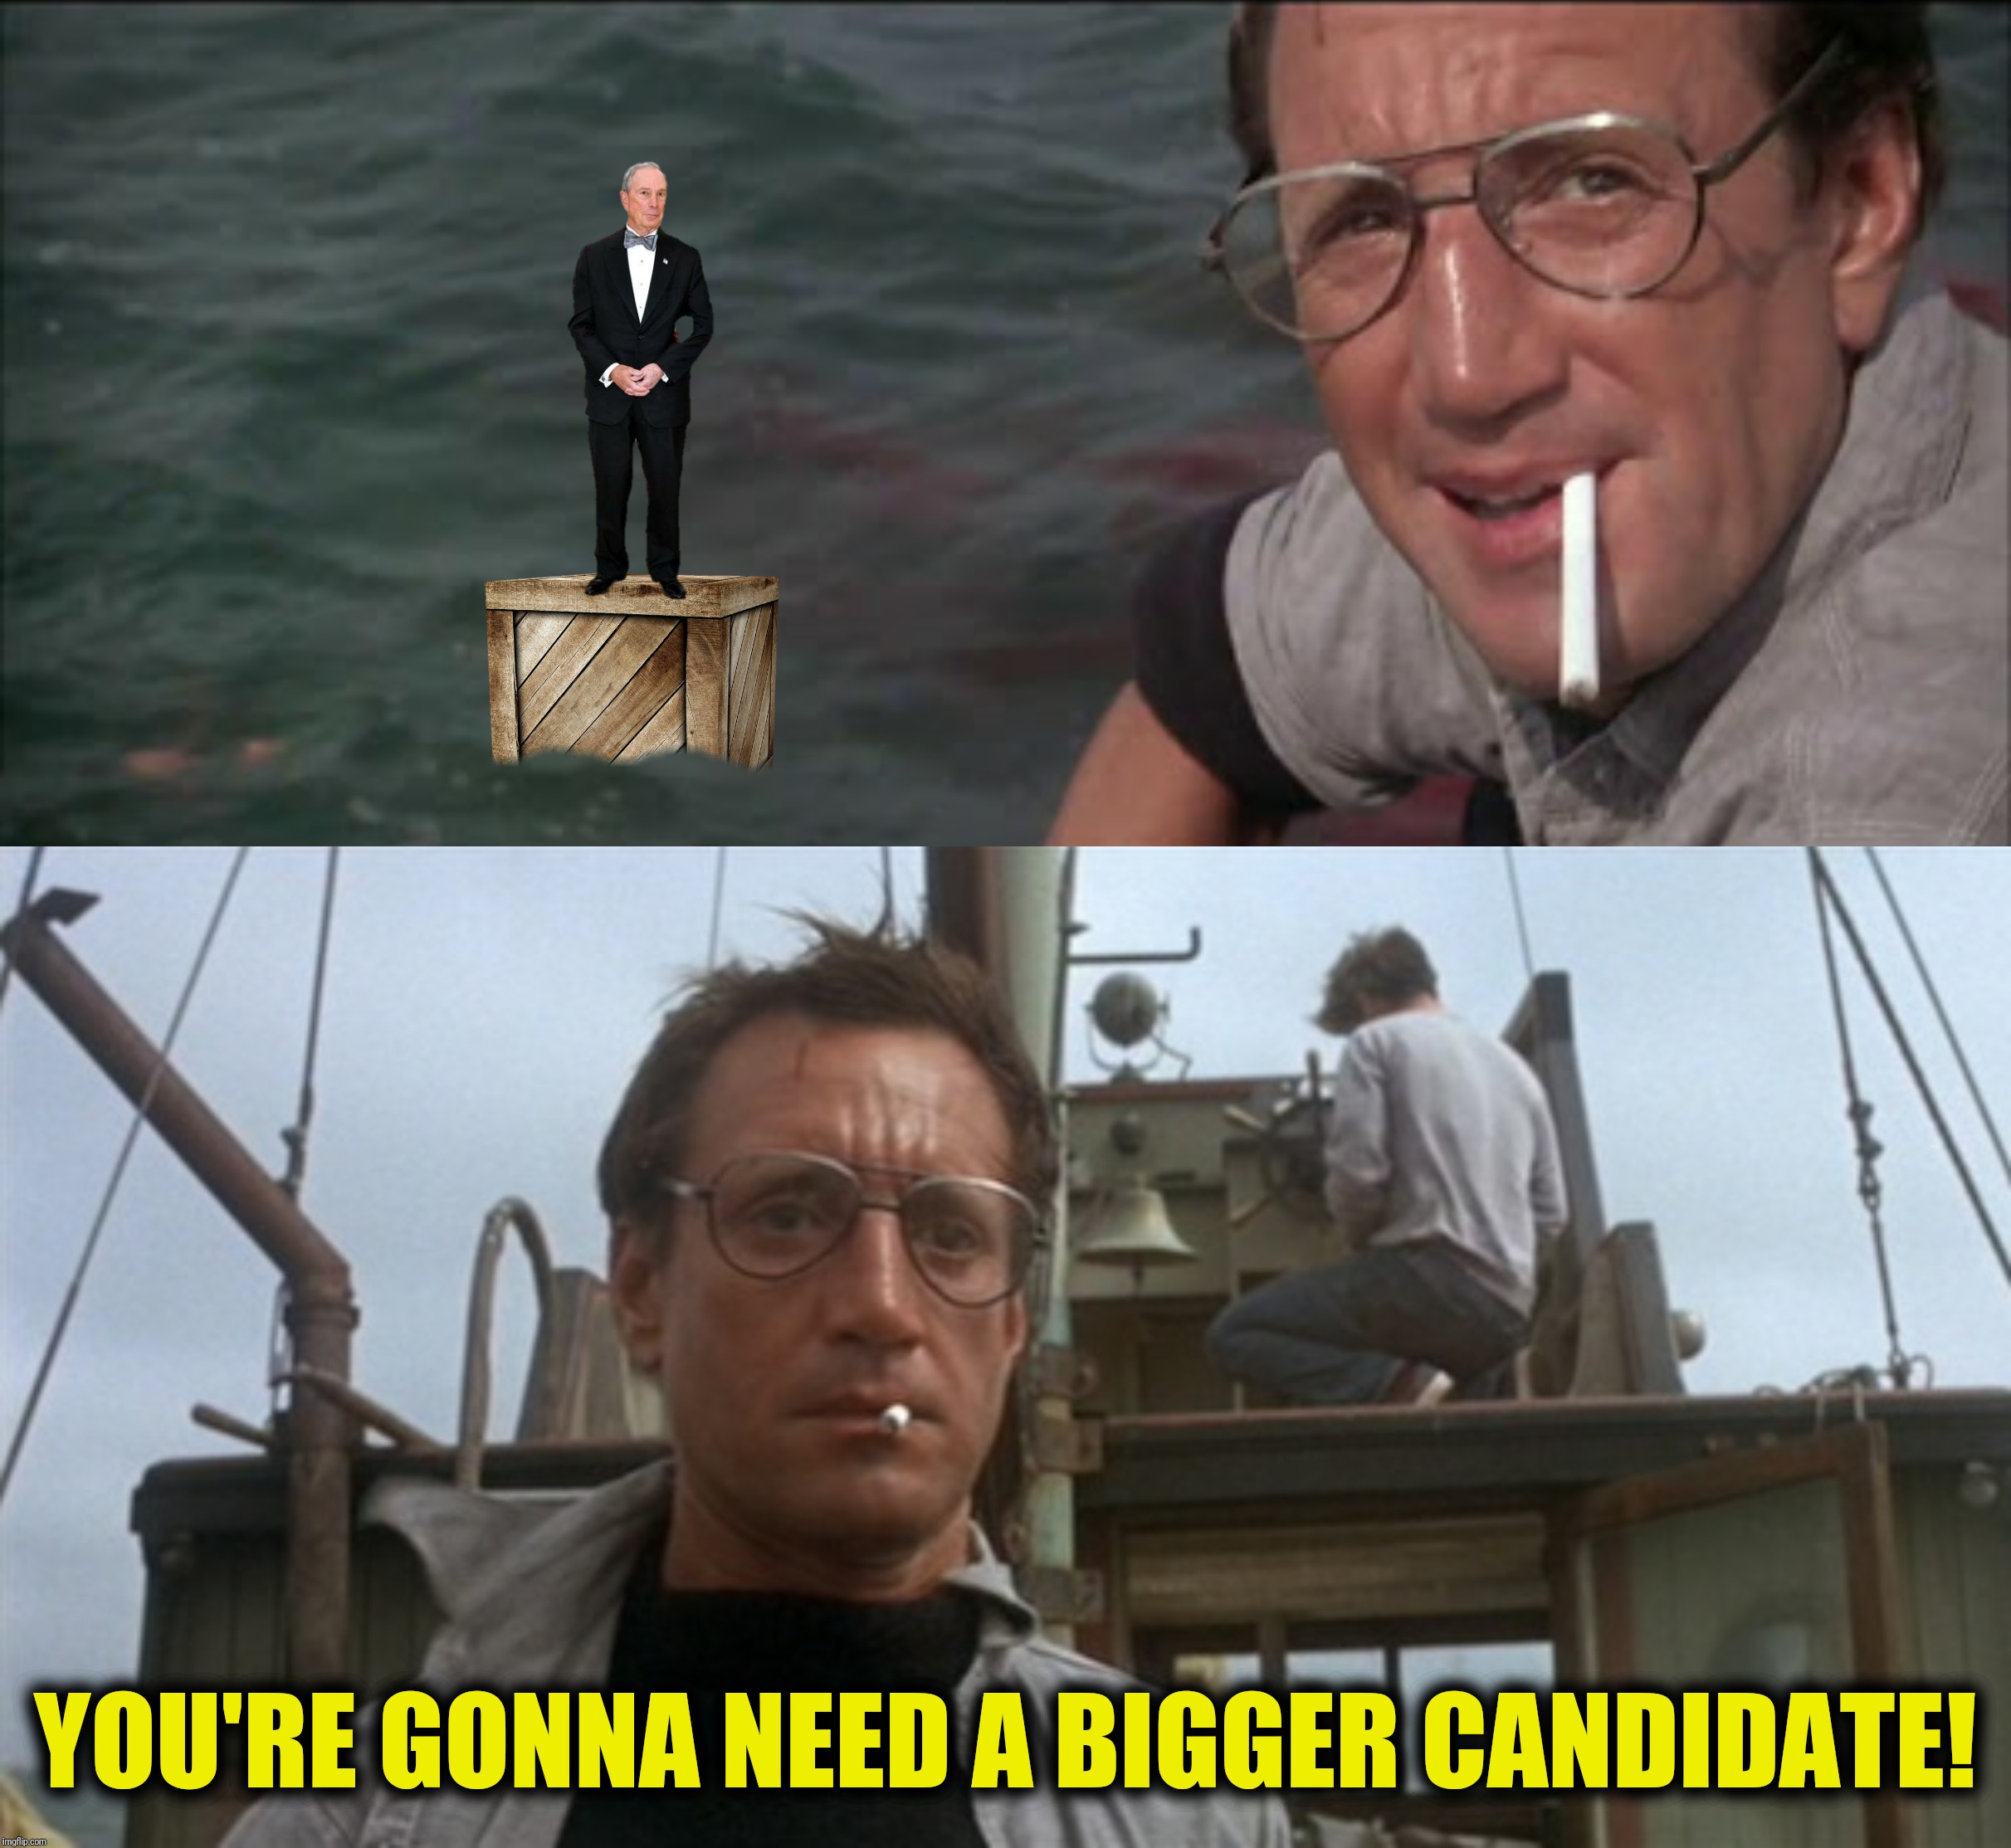 Mini Mike | YOU'RE GONNA NEED A BIGGER CANDIDATE! | image tagged in bad photoshop,little mike bloomberg,box,jaws | made w/ Imgflip meme maker